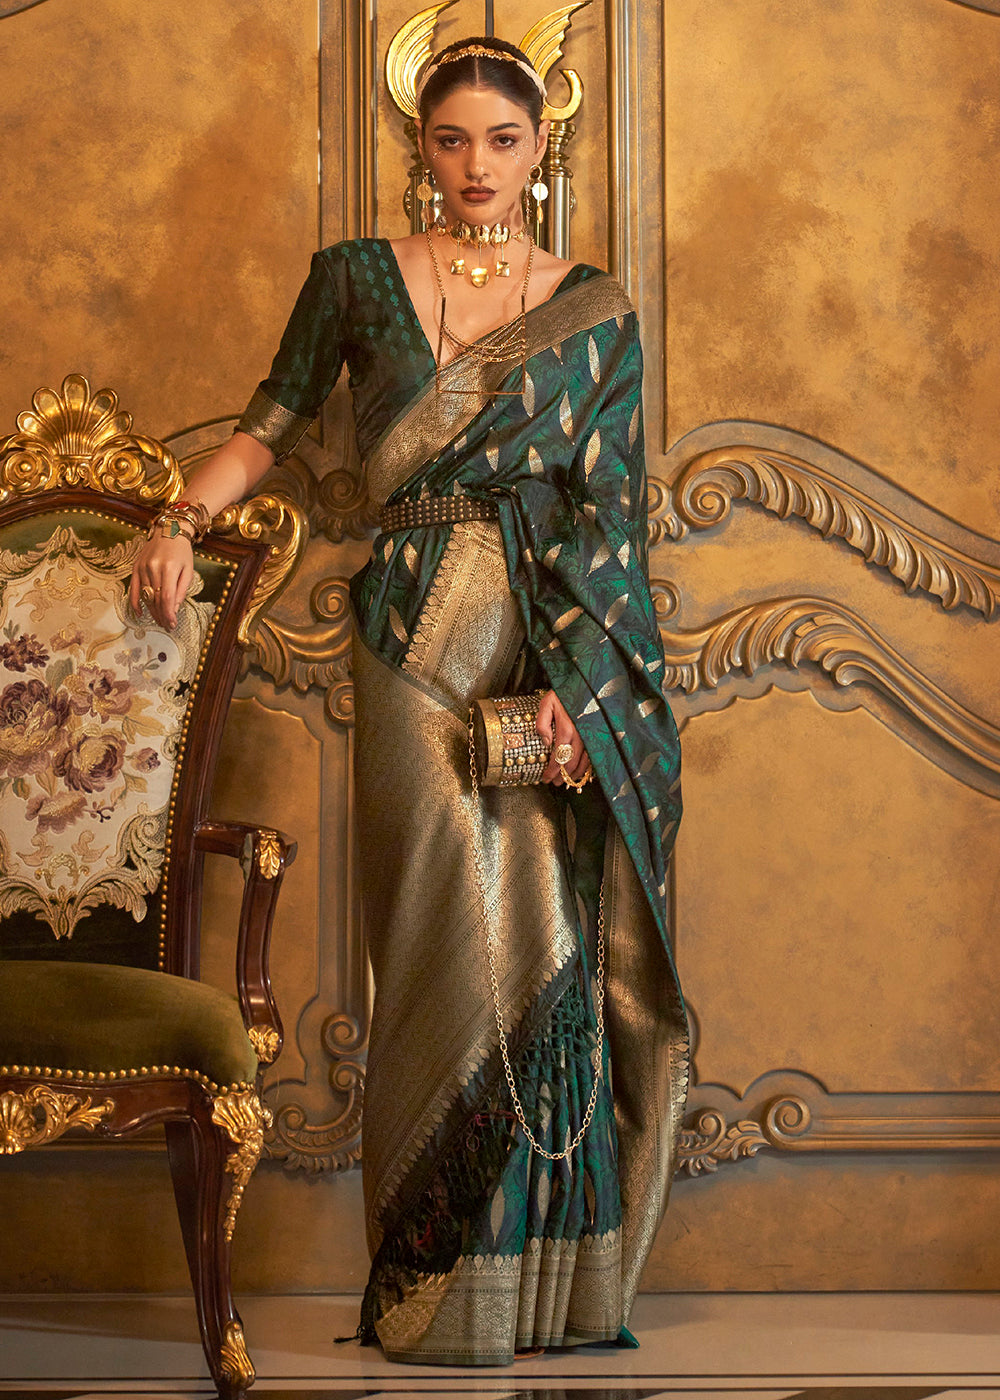 Buy Now Bollywood Style Exquisite Bottle-Green Pure Satin Silk Saree Online in USA, UK, Canada & Worldwide at Empress Clothing.